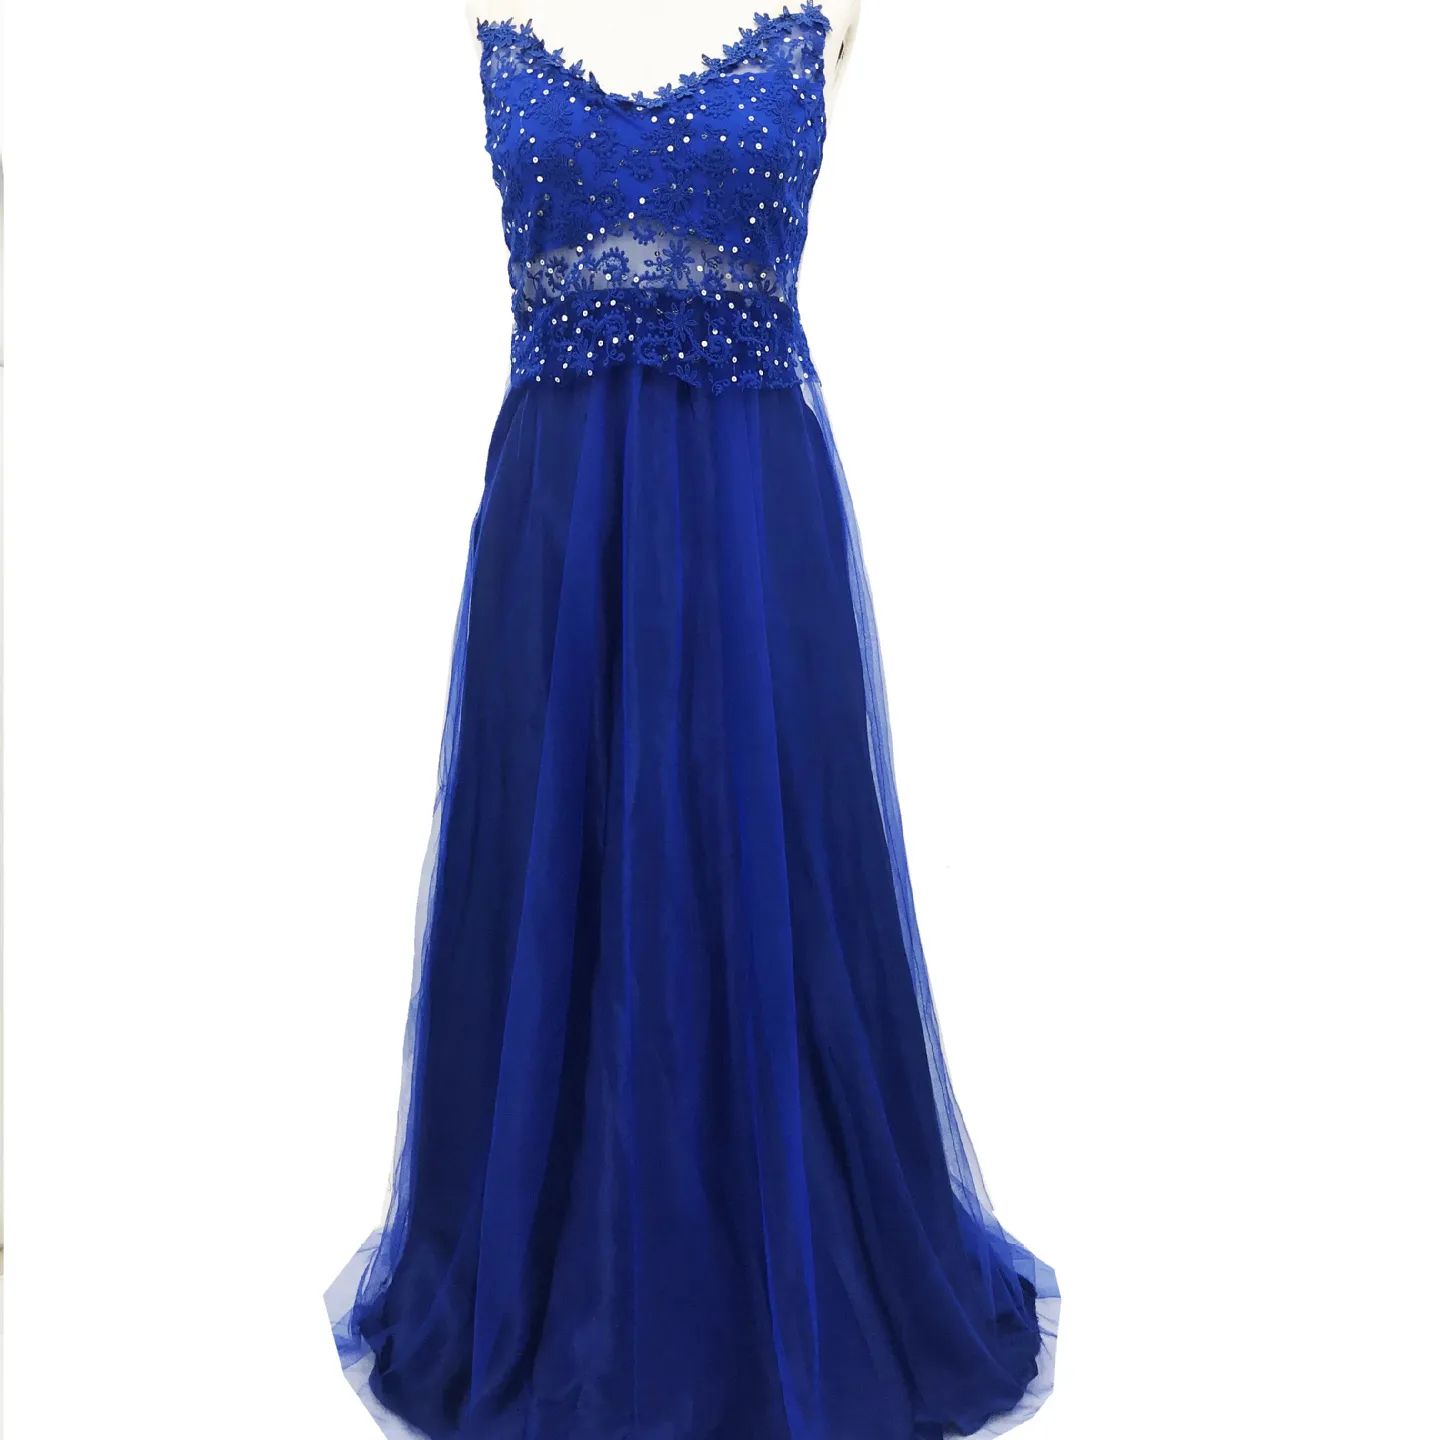 Solid color embroidered sexy sequins dress floor-length dress bridesmaid dresses